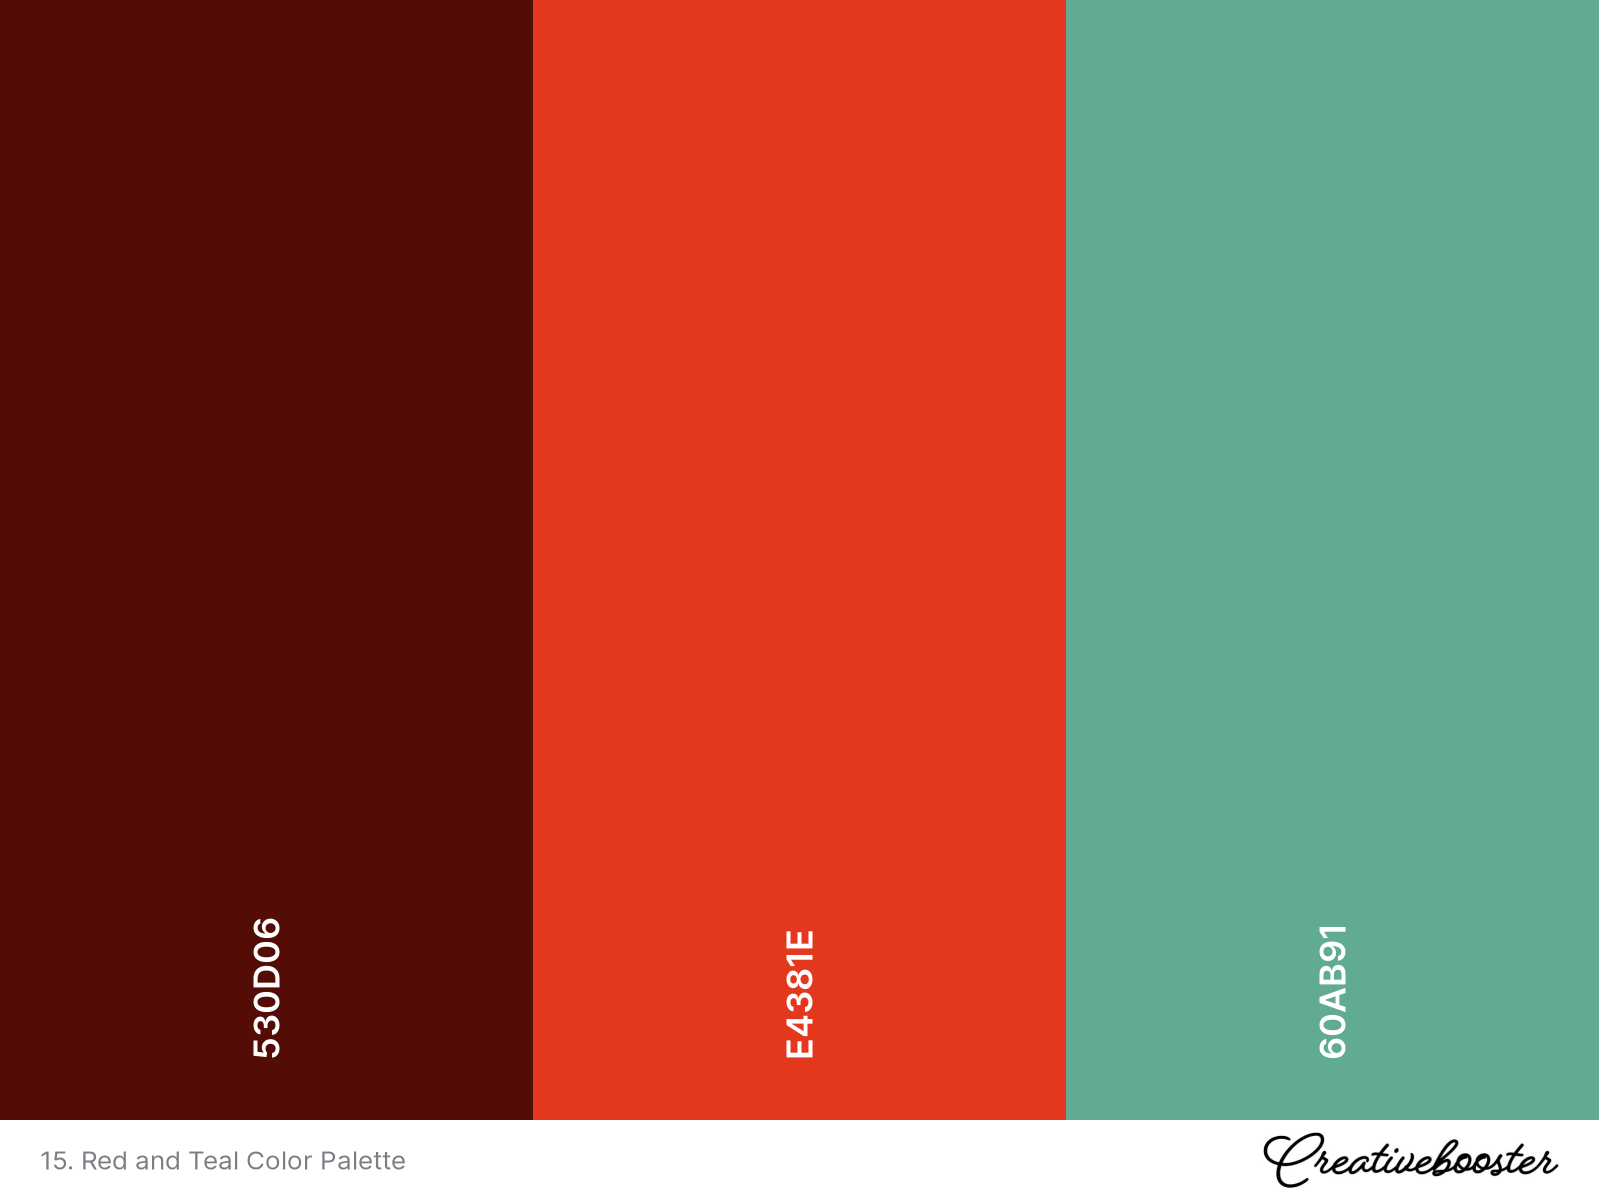 15. Red and Teal Color Palette